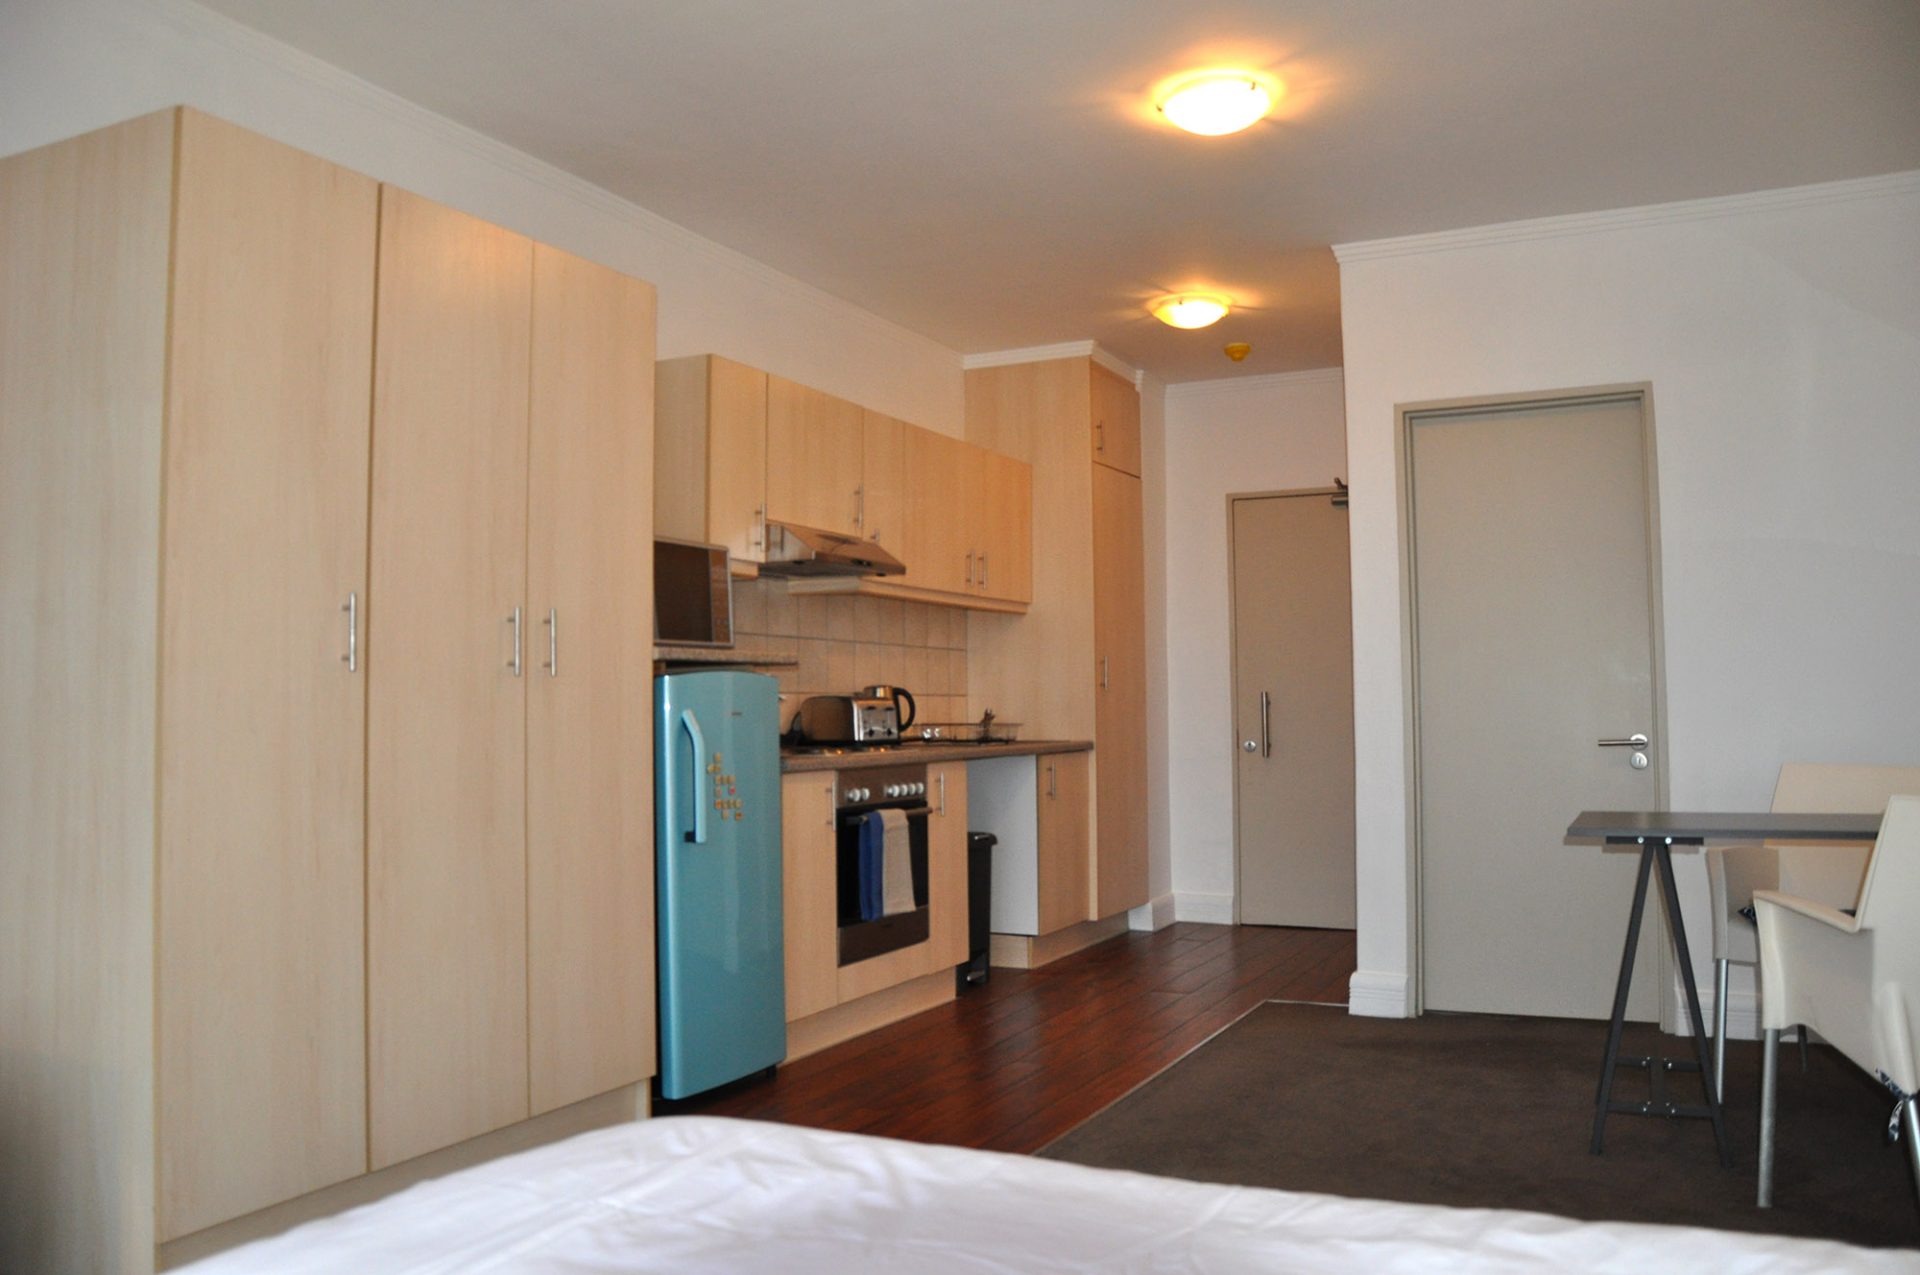 Photo 3 of Cityscapes Midtown Studio accommodation in City Centre, Cape Town with 1 bedrooms and 1 bathrooms